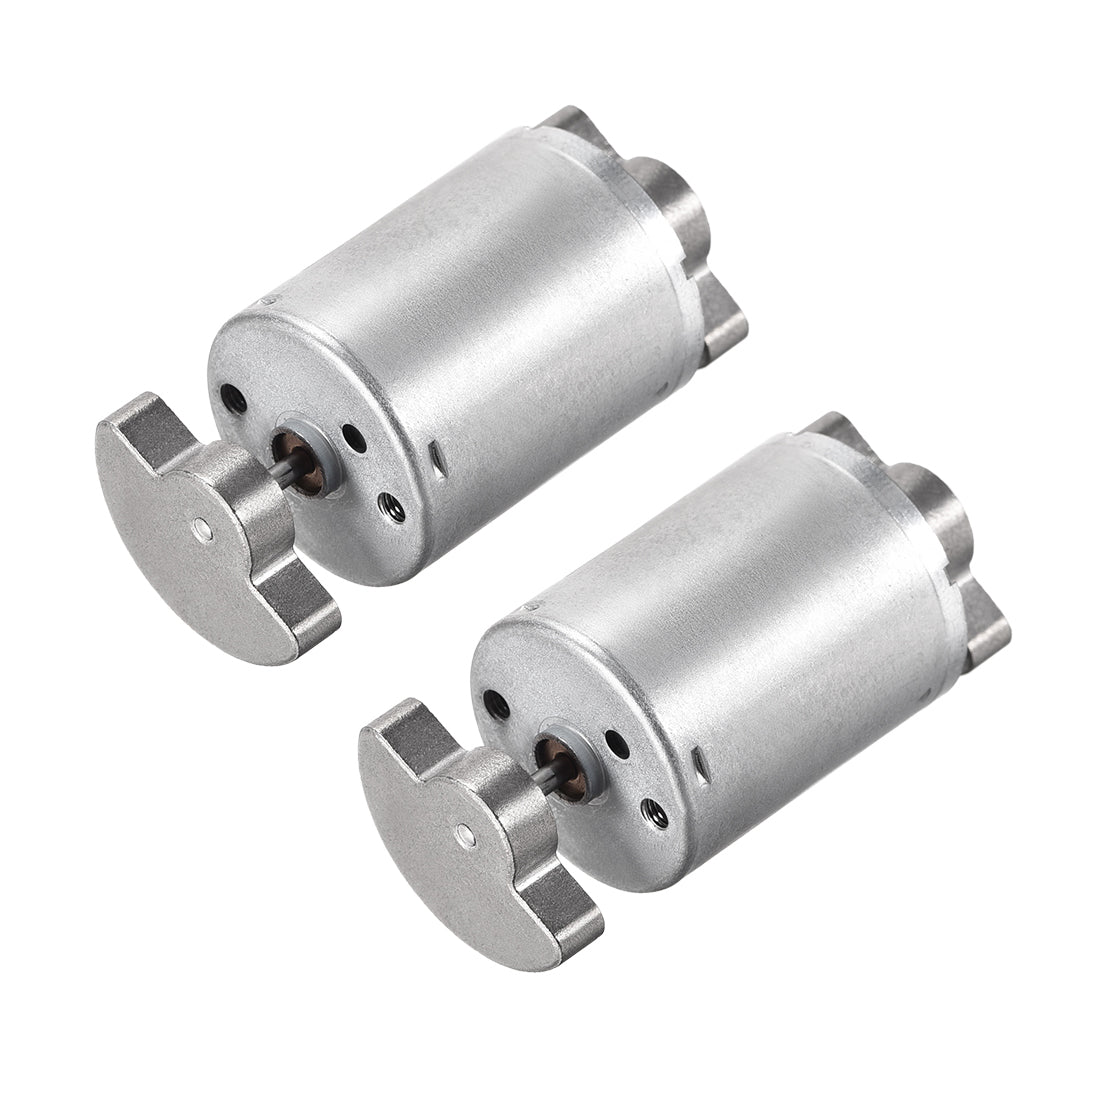 uxcell Uxcell Double Shaft Vibration Motors DC 6V 3000RPM Strong Power Dual Head Massager Vibrating Motor 51x24.2mm 2Pcs